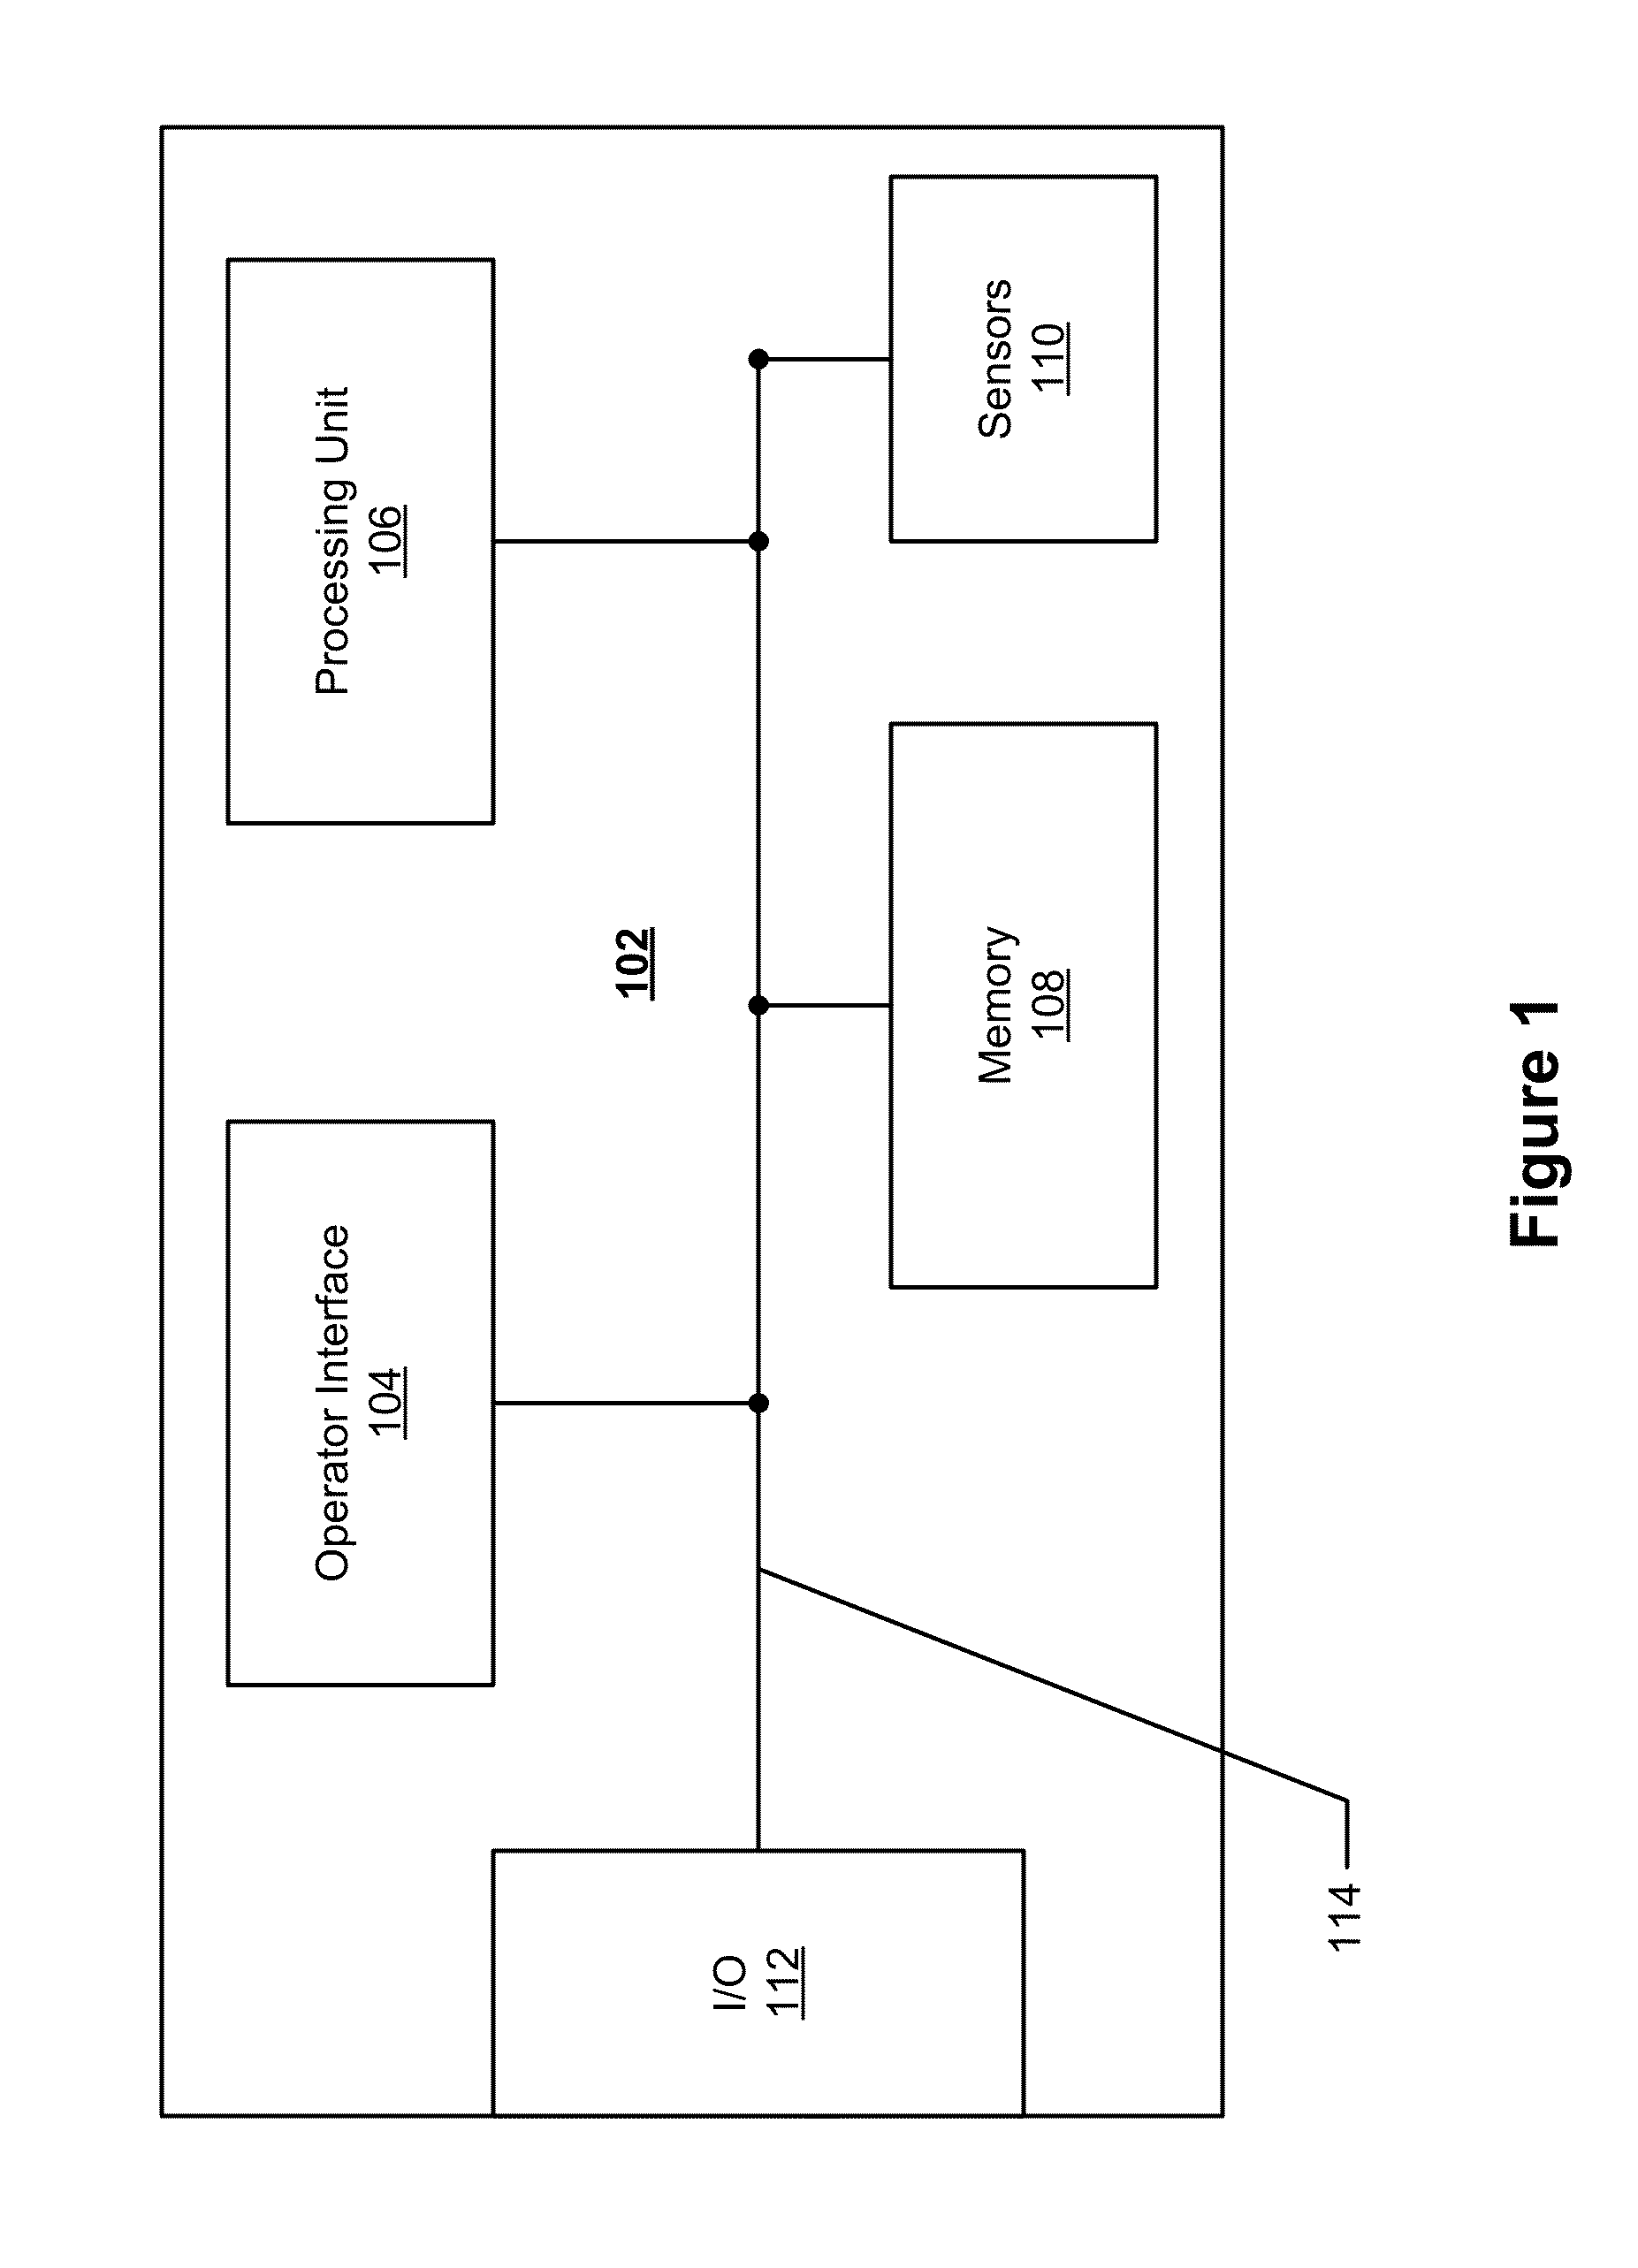 Biometric monitoring device with contextually- or environmentally-dependent display